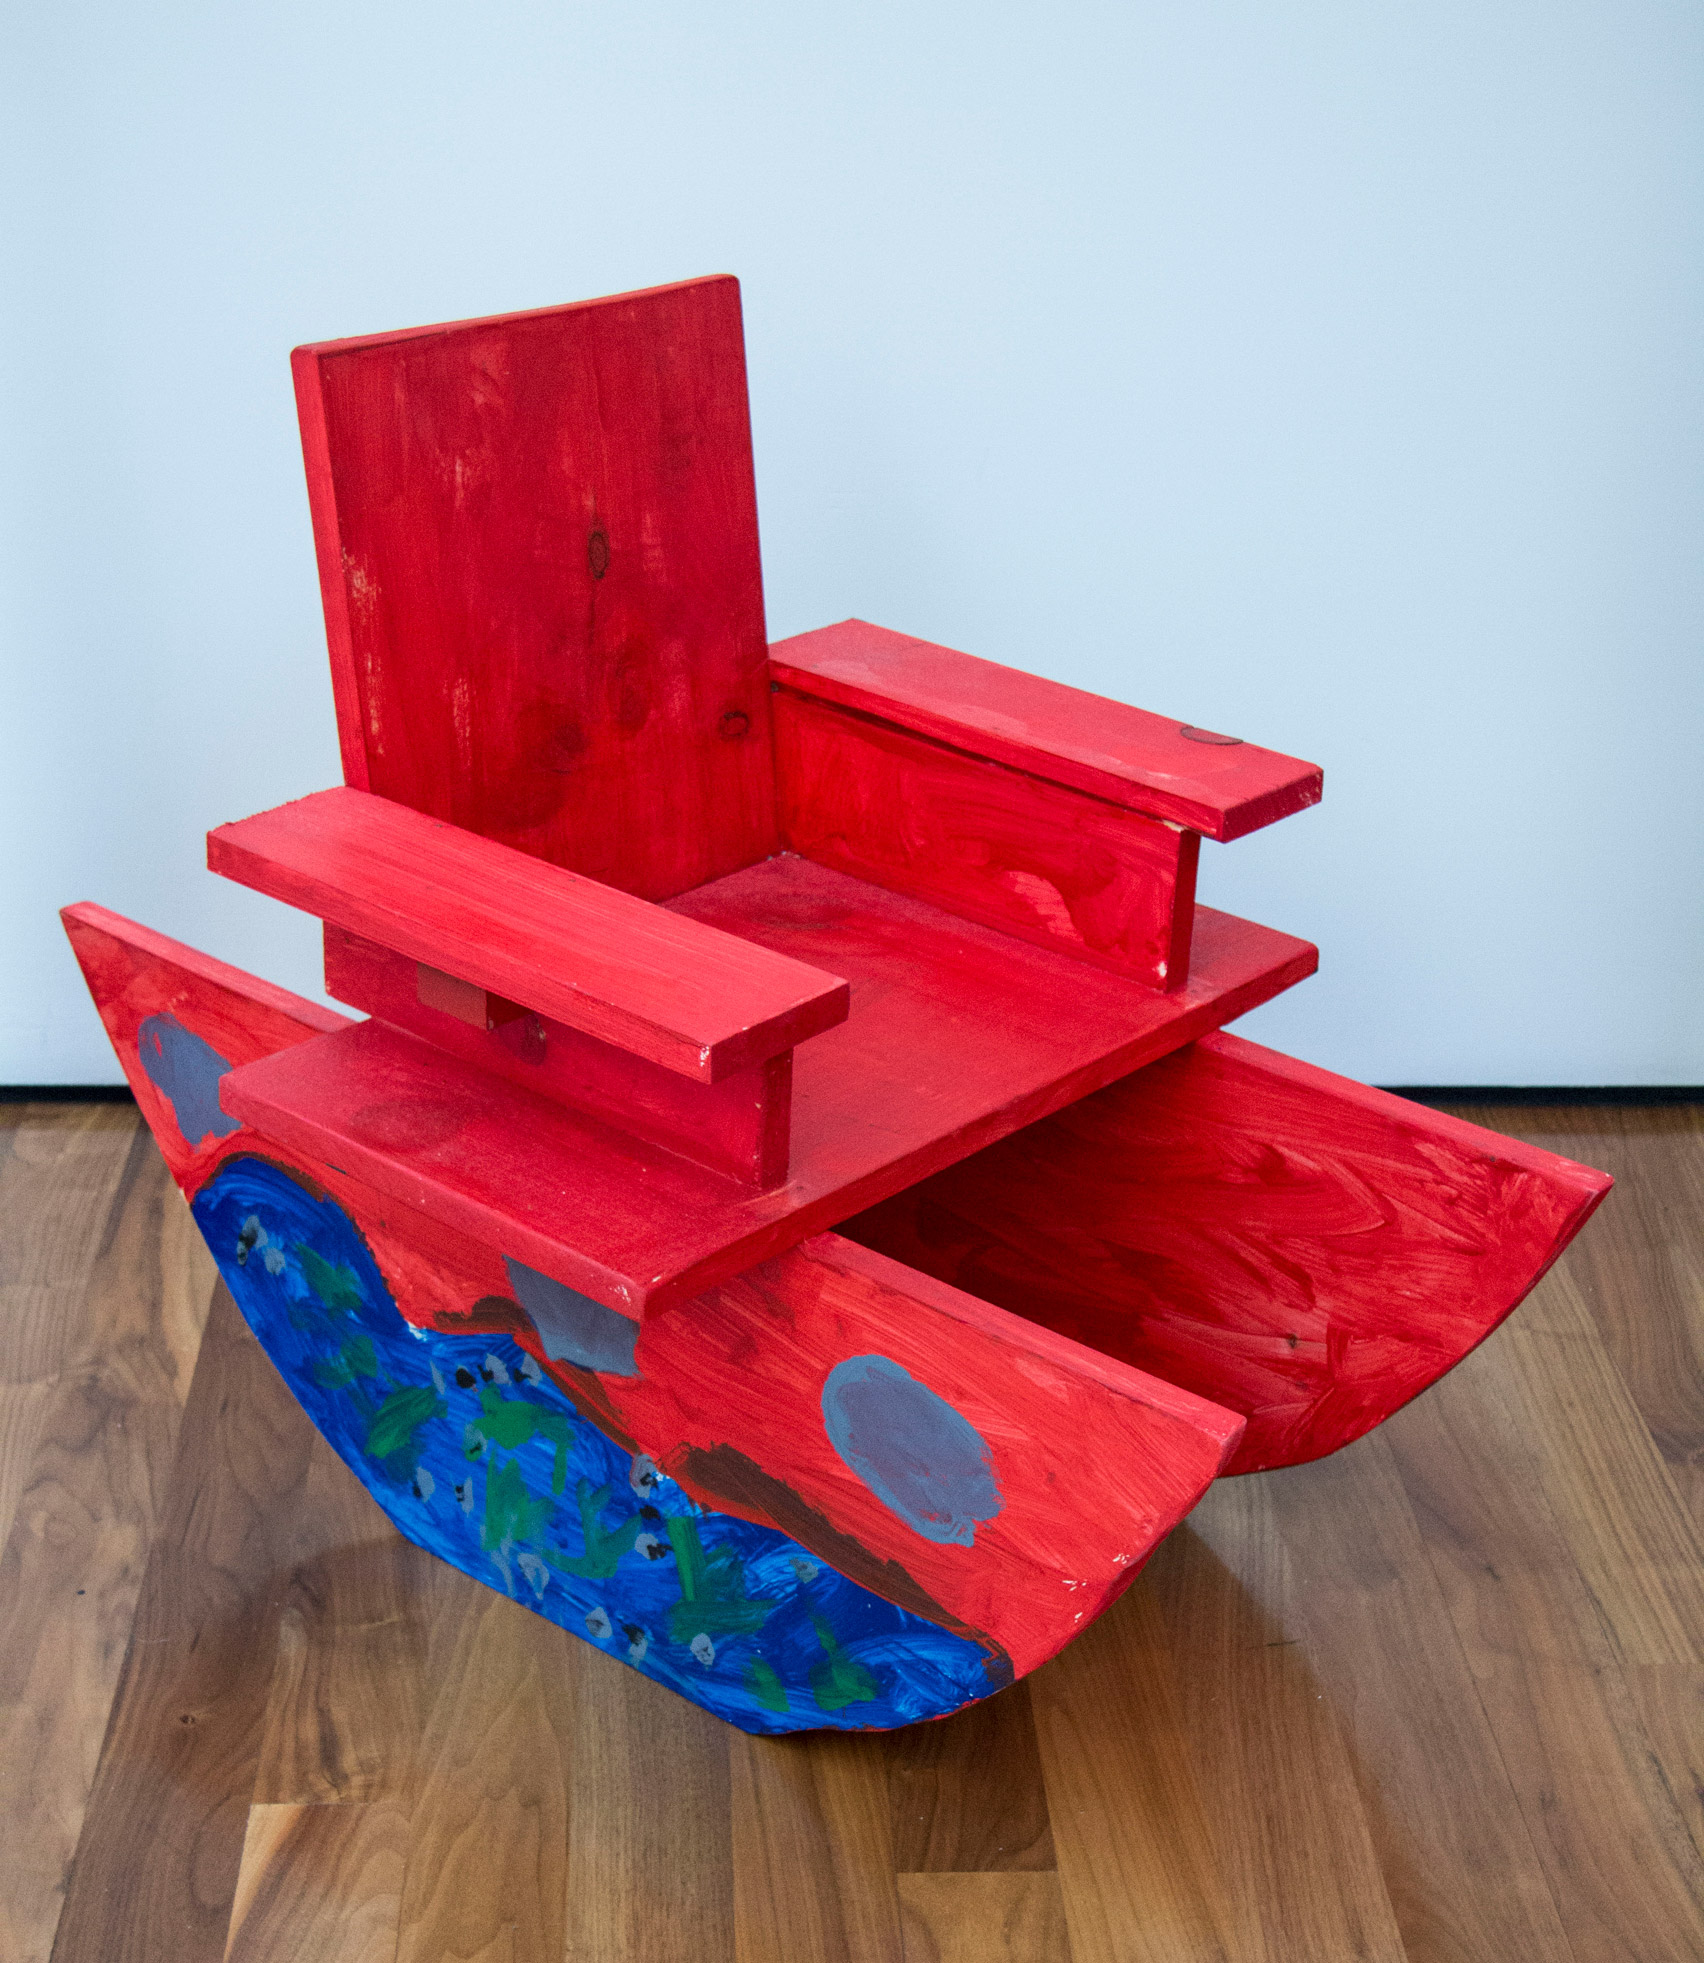 Boat-shaped seating design from Bruce Edelstein's workshop at Trinity School